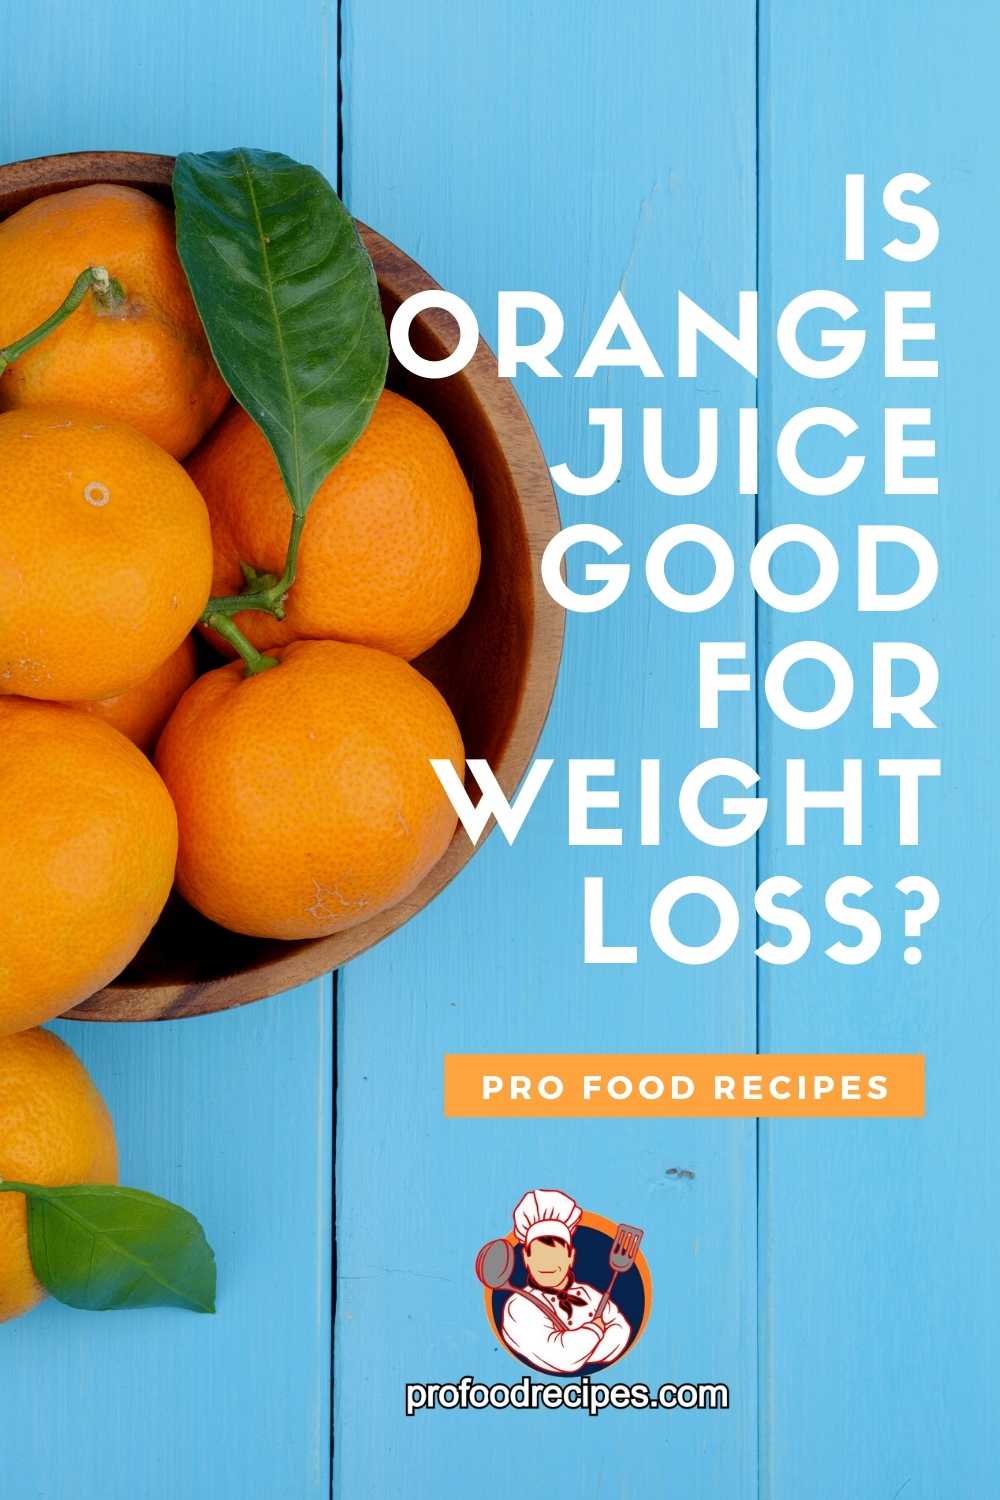 Is Orange Juice Good for Weight Loss?